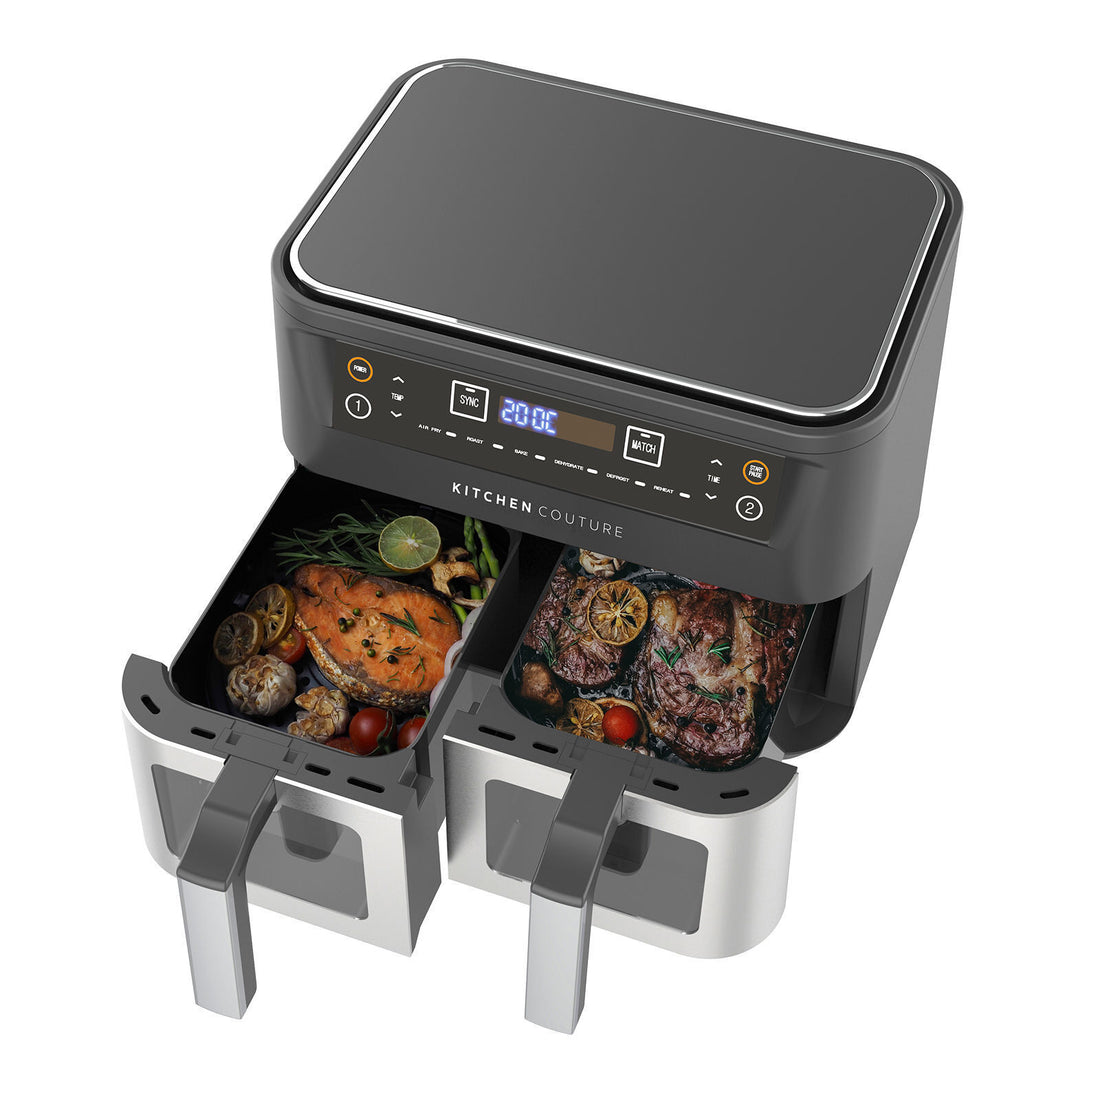 Kitchen Couture Dual View 2 x 5 Litre Air Fryer Stainless Steel-Small Kitchen Appliances-PEROZ Accessories